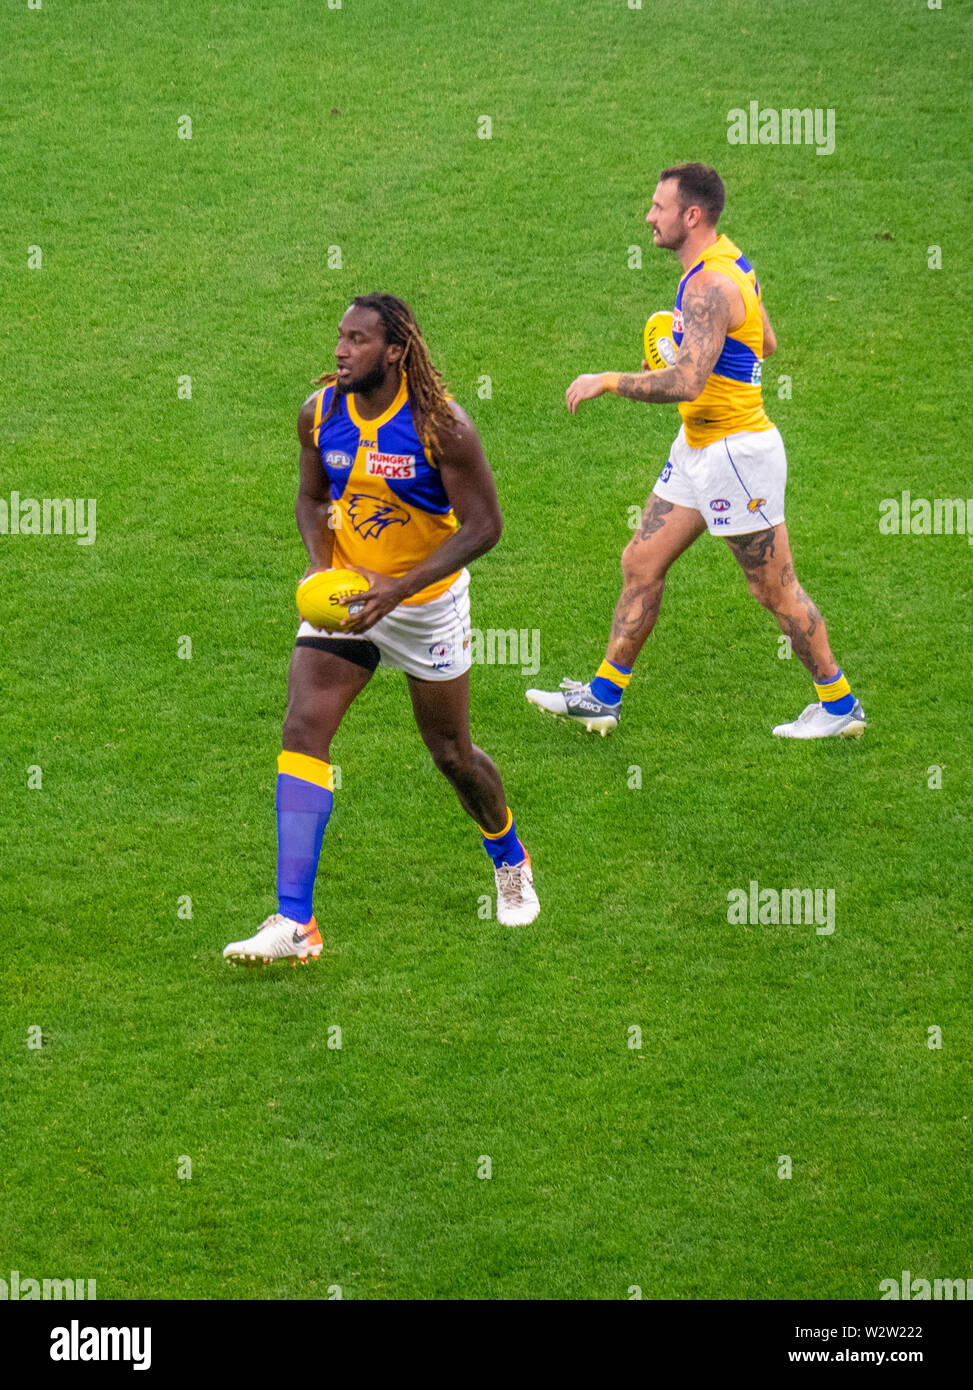 West Coast Eagles footballers Nic Naitanui And Chris Masten warming up before the Western Derby at Optus Stadium Perth Western Australia. Stock Photo